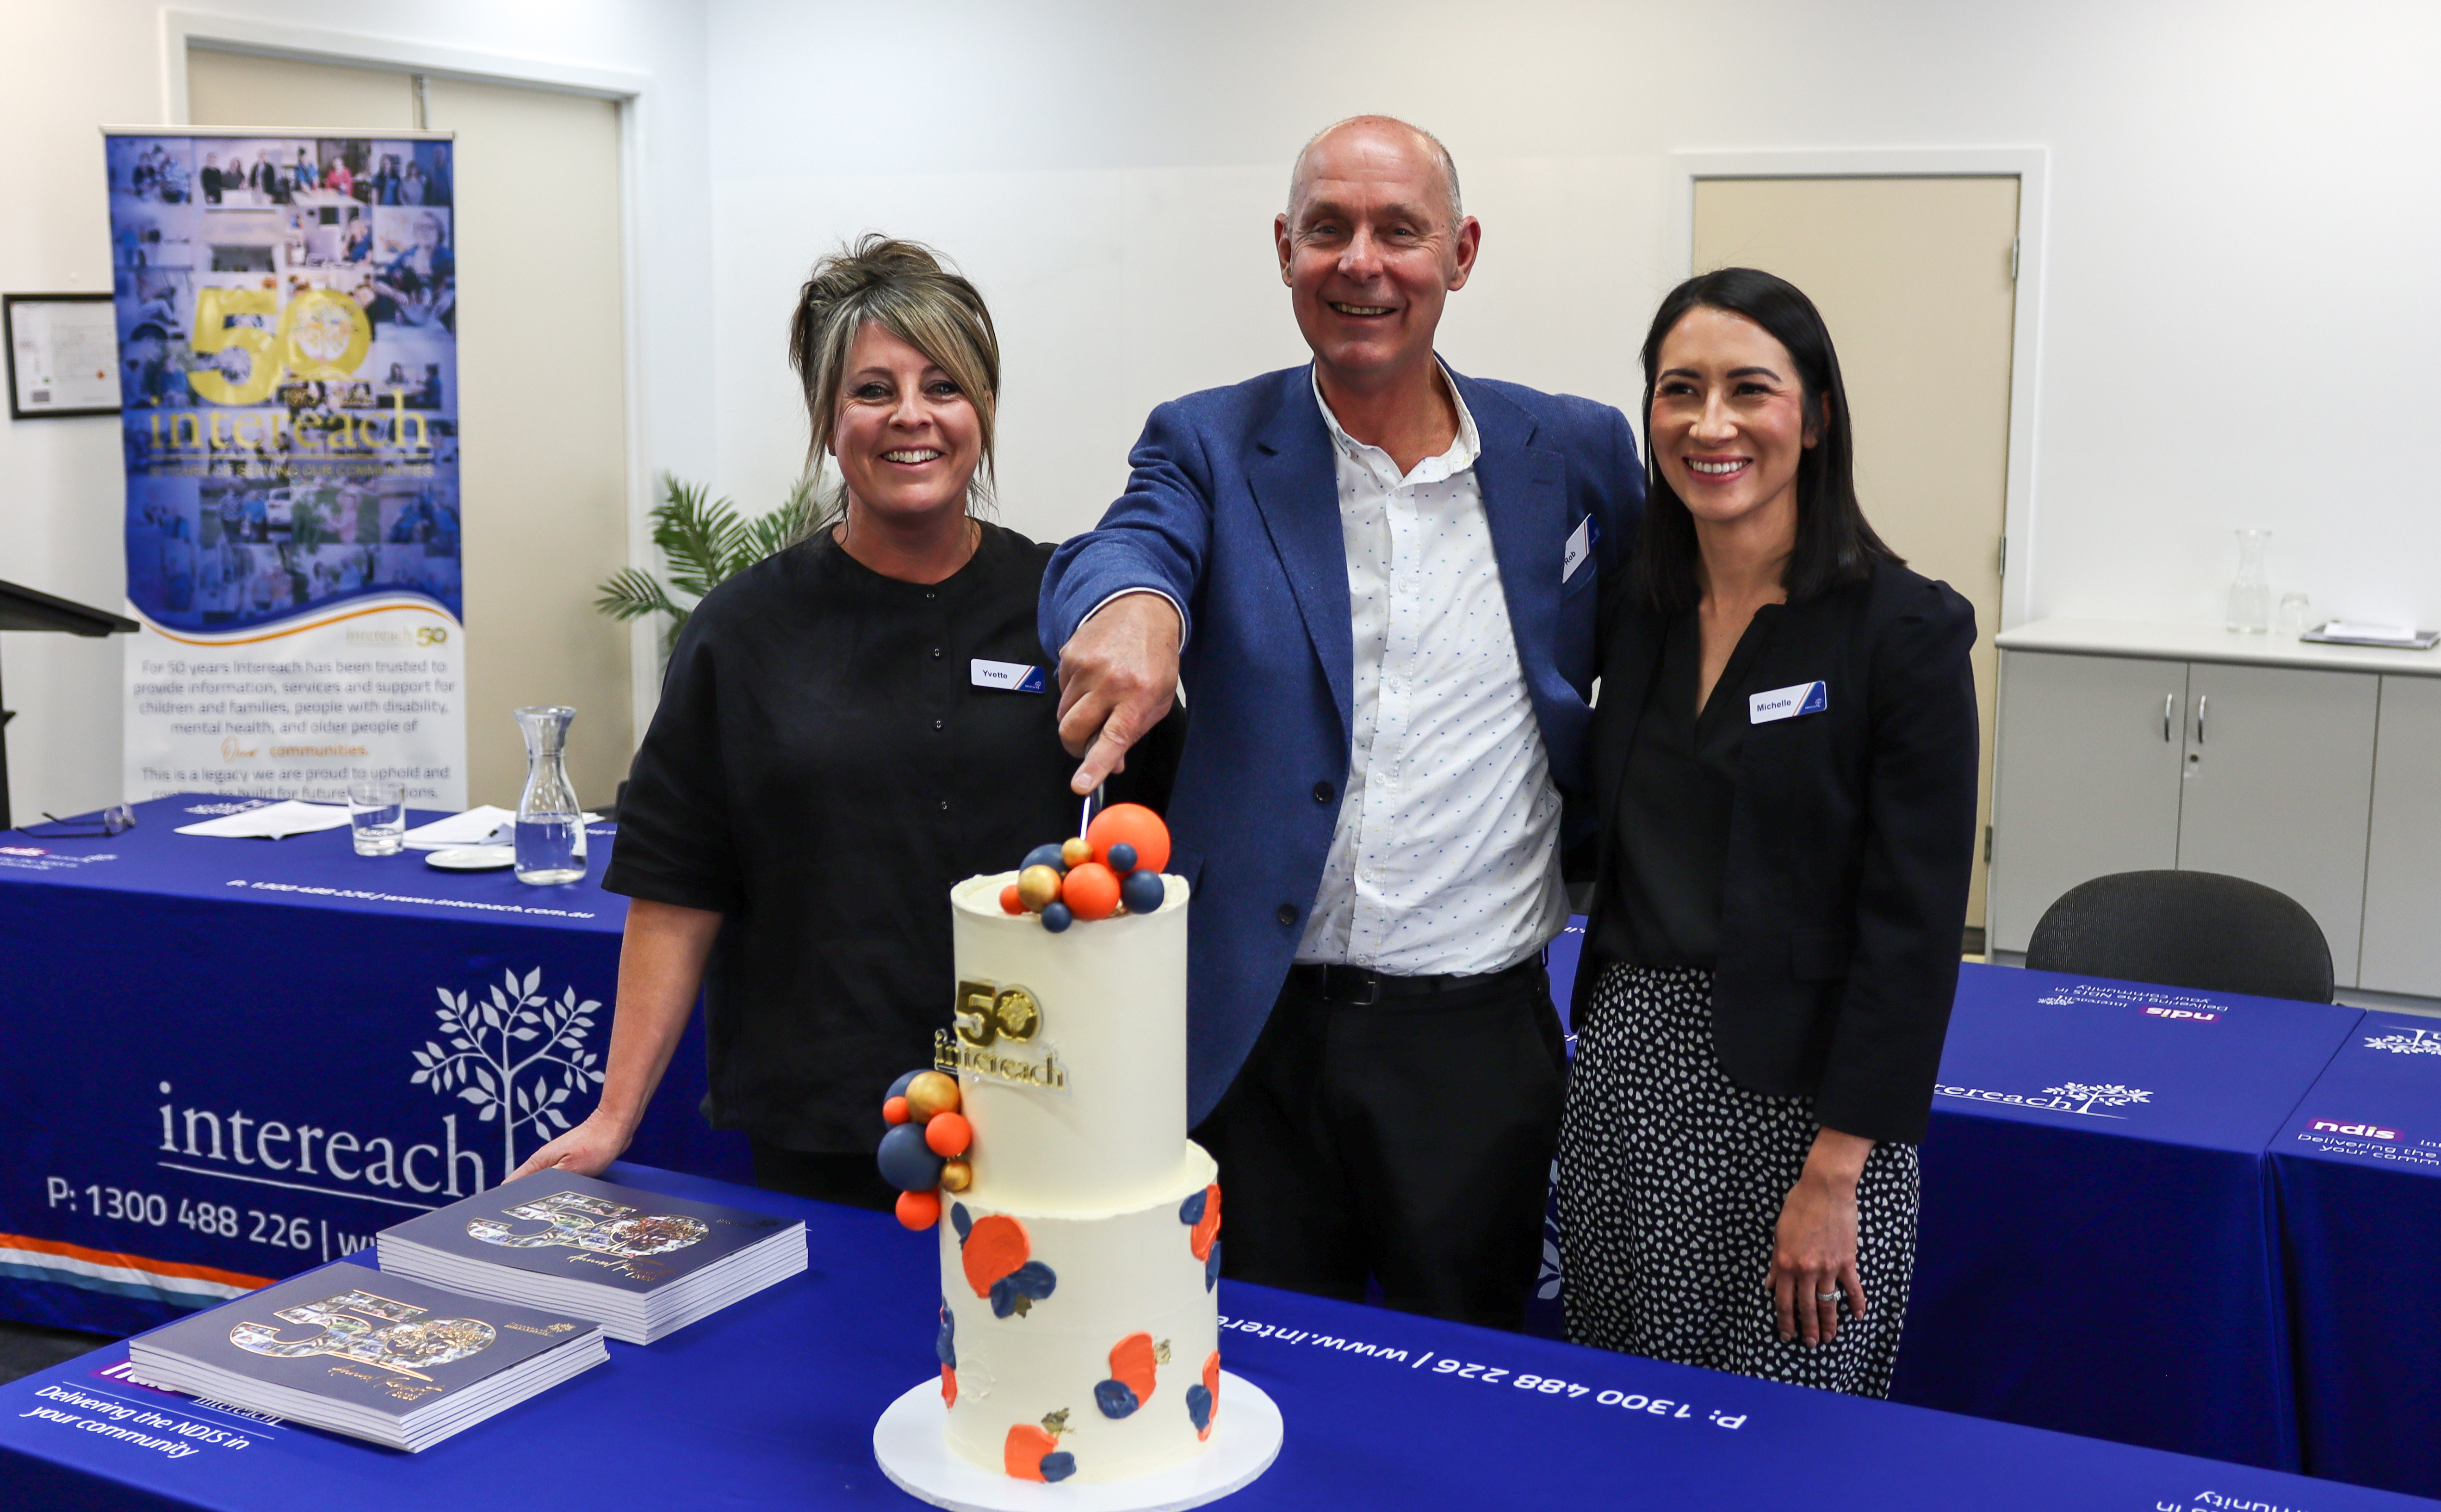 Two women dressed in black and a man in a suit standing in a board room behind a table smiling while cutting a two-tiered cake to celebrate Intereach